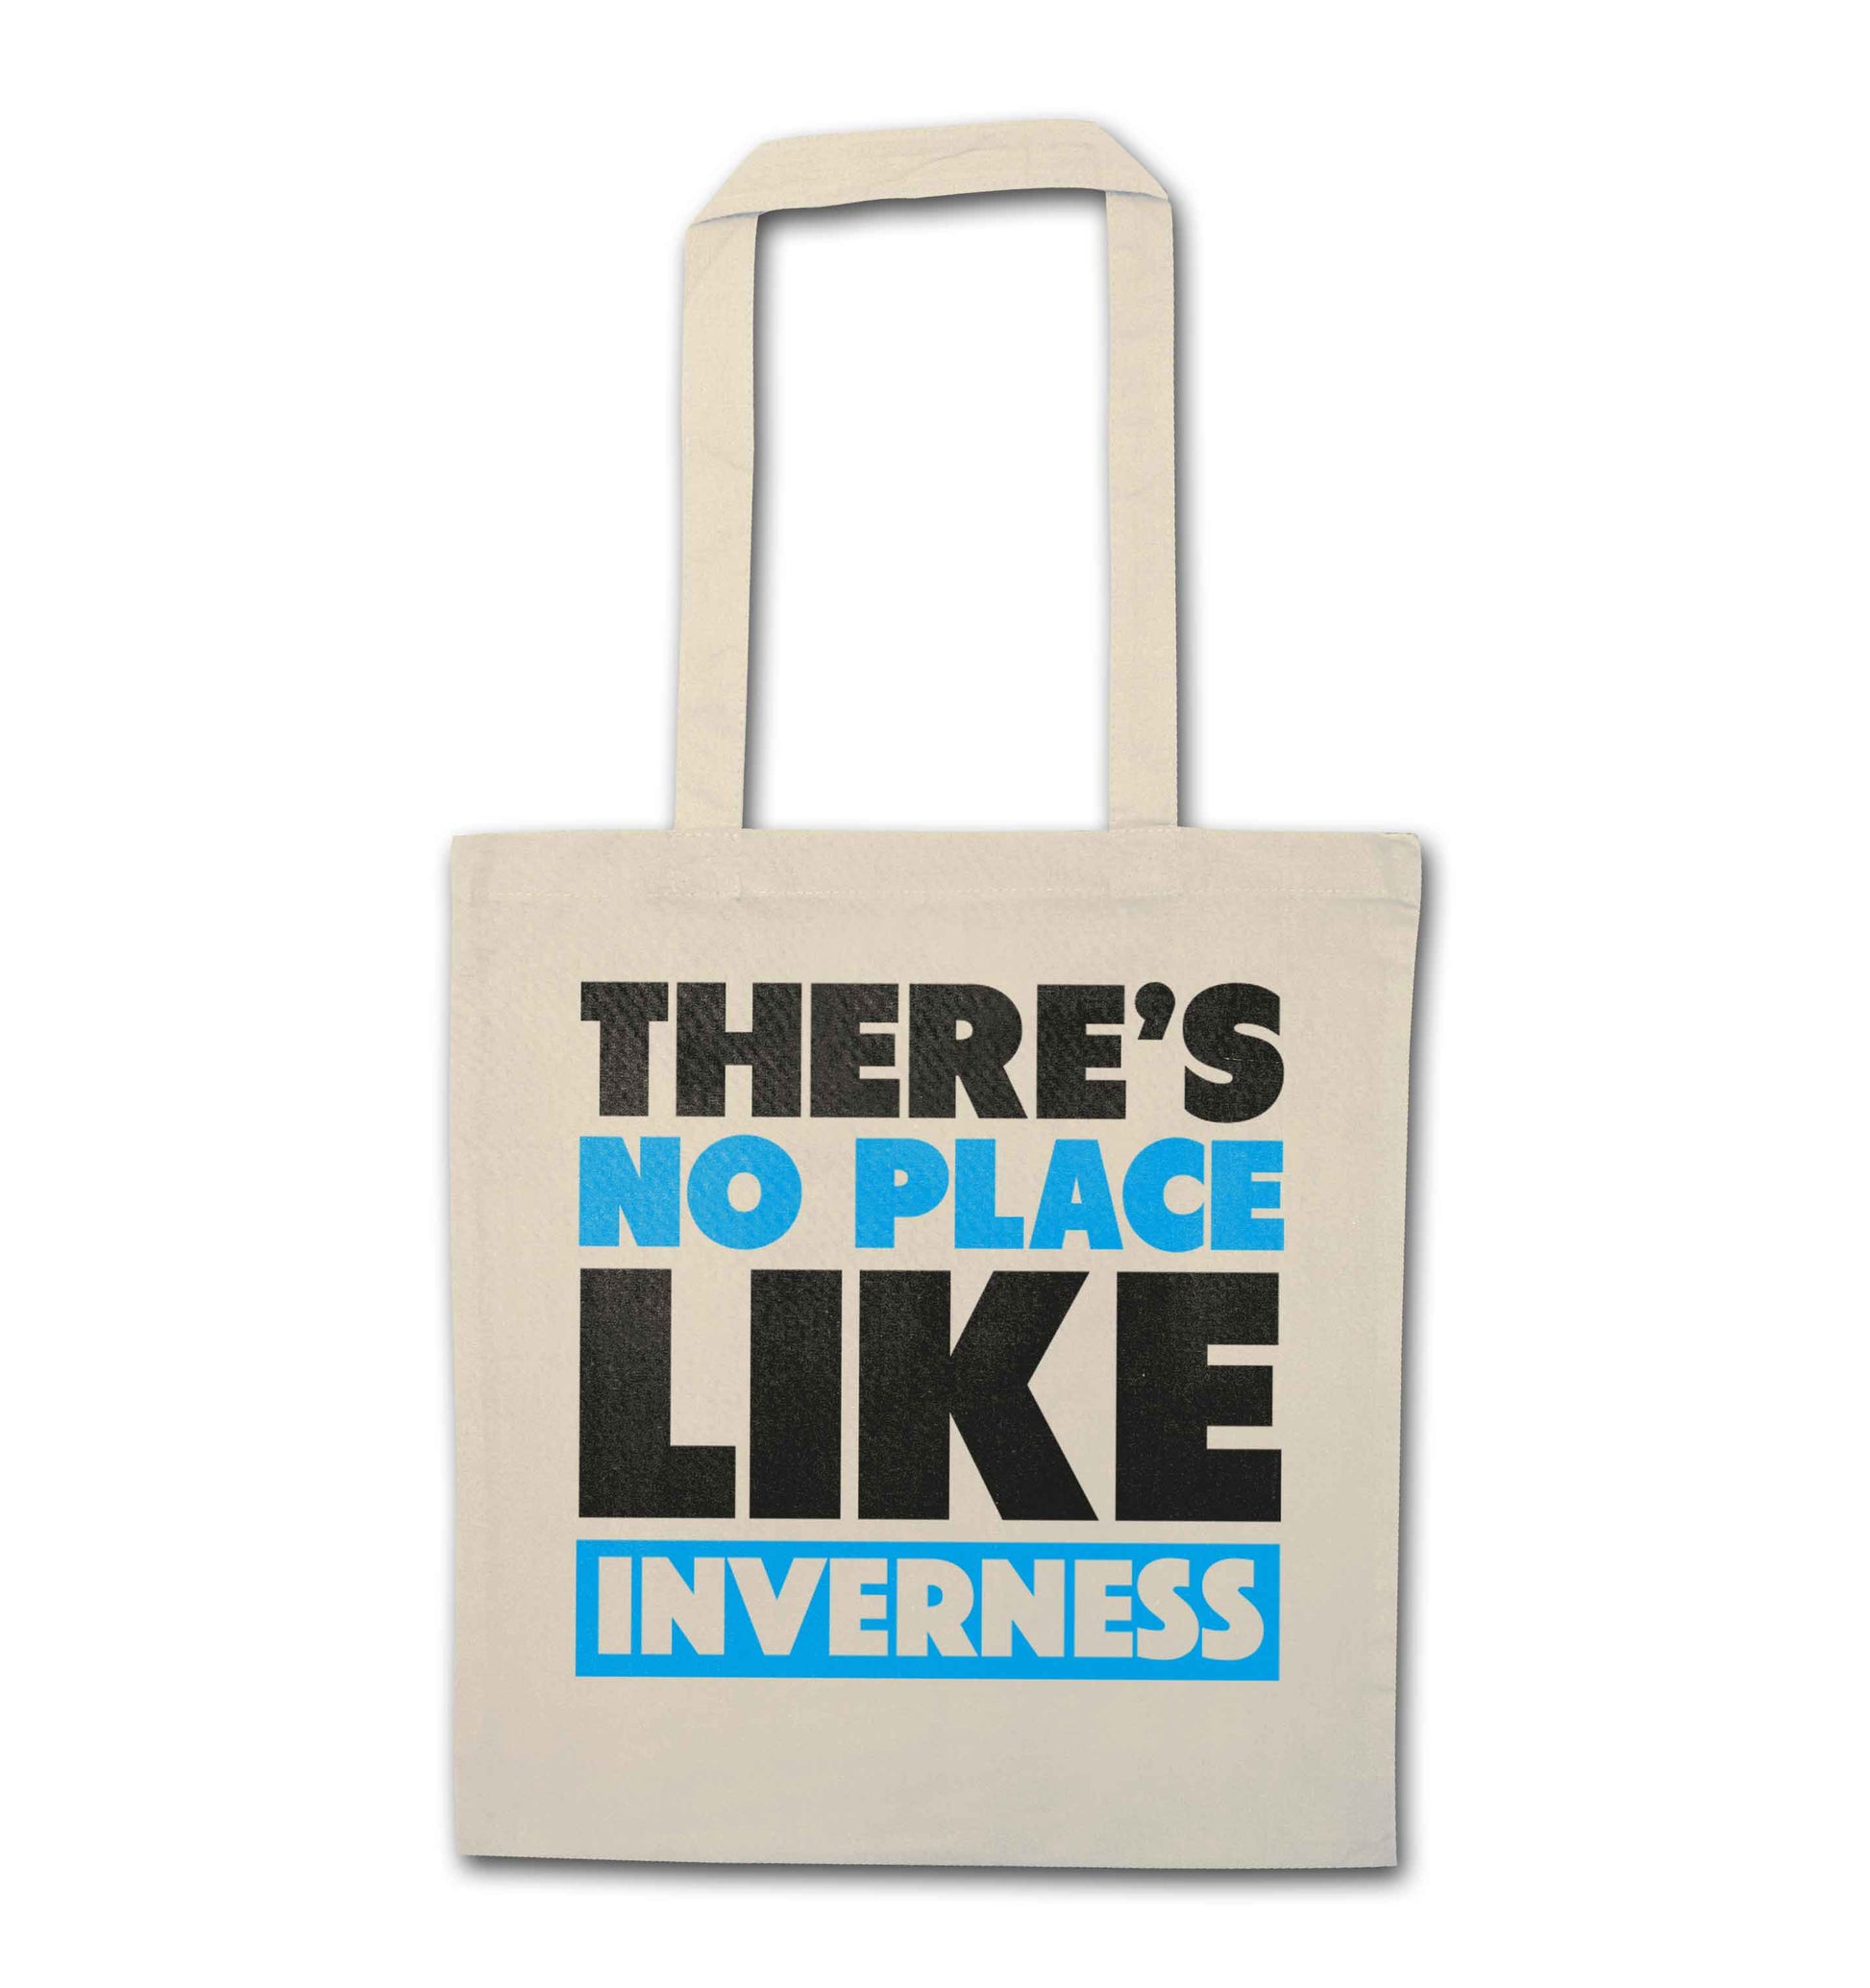 There's no place like Inverness natural tote bag